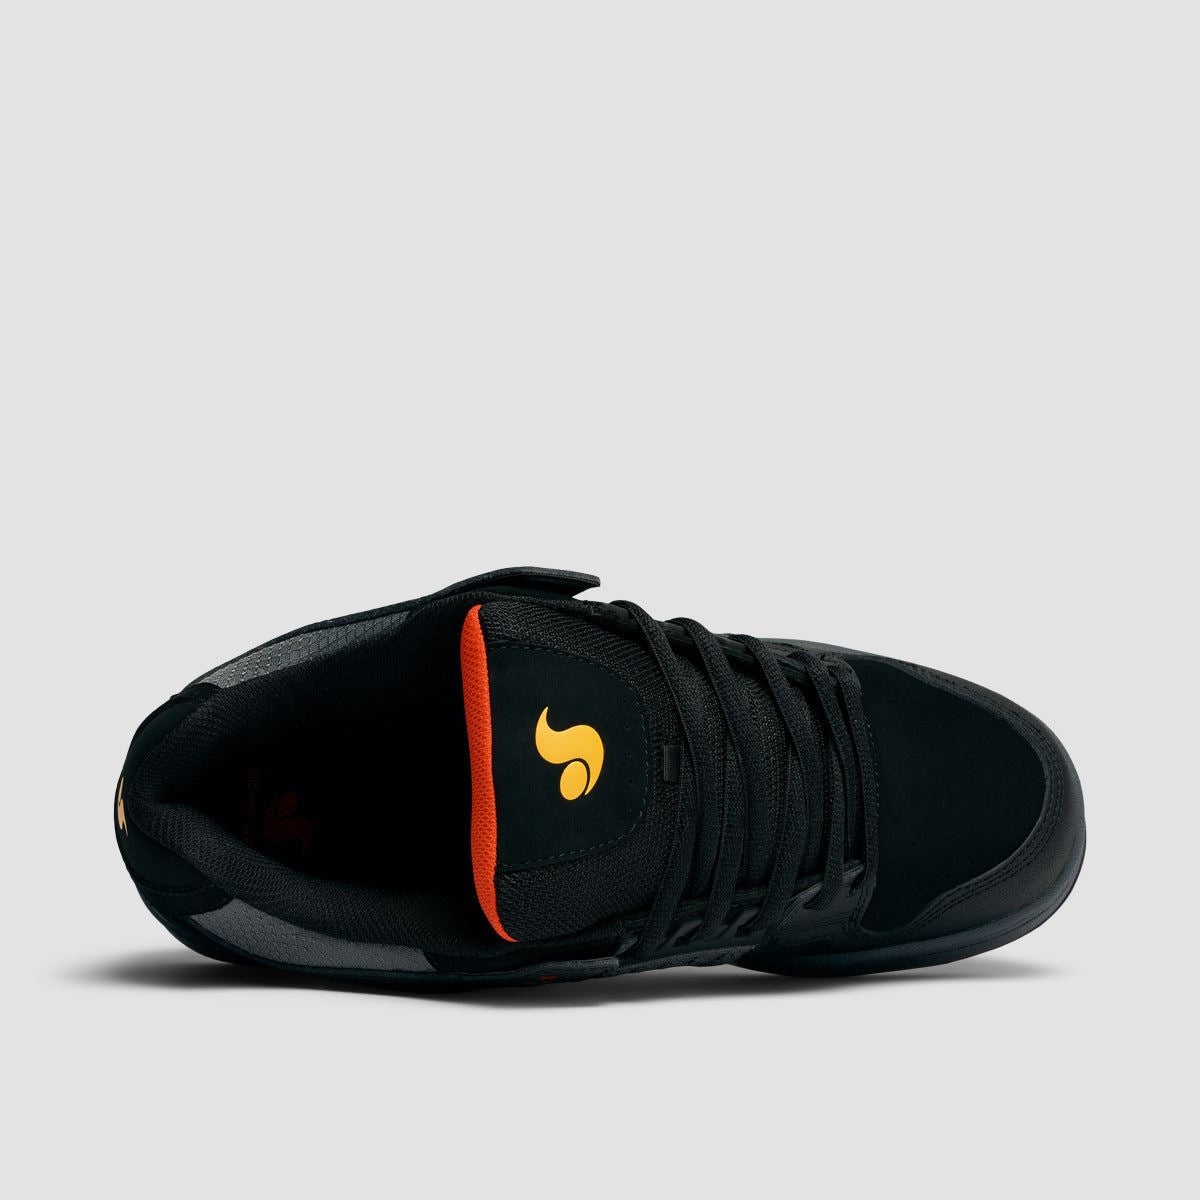 DVS Celsius Shoes - Black/Fiery Red/Yellow Nubuck